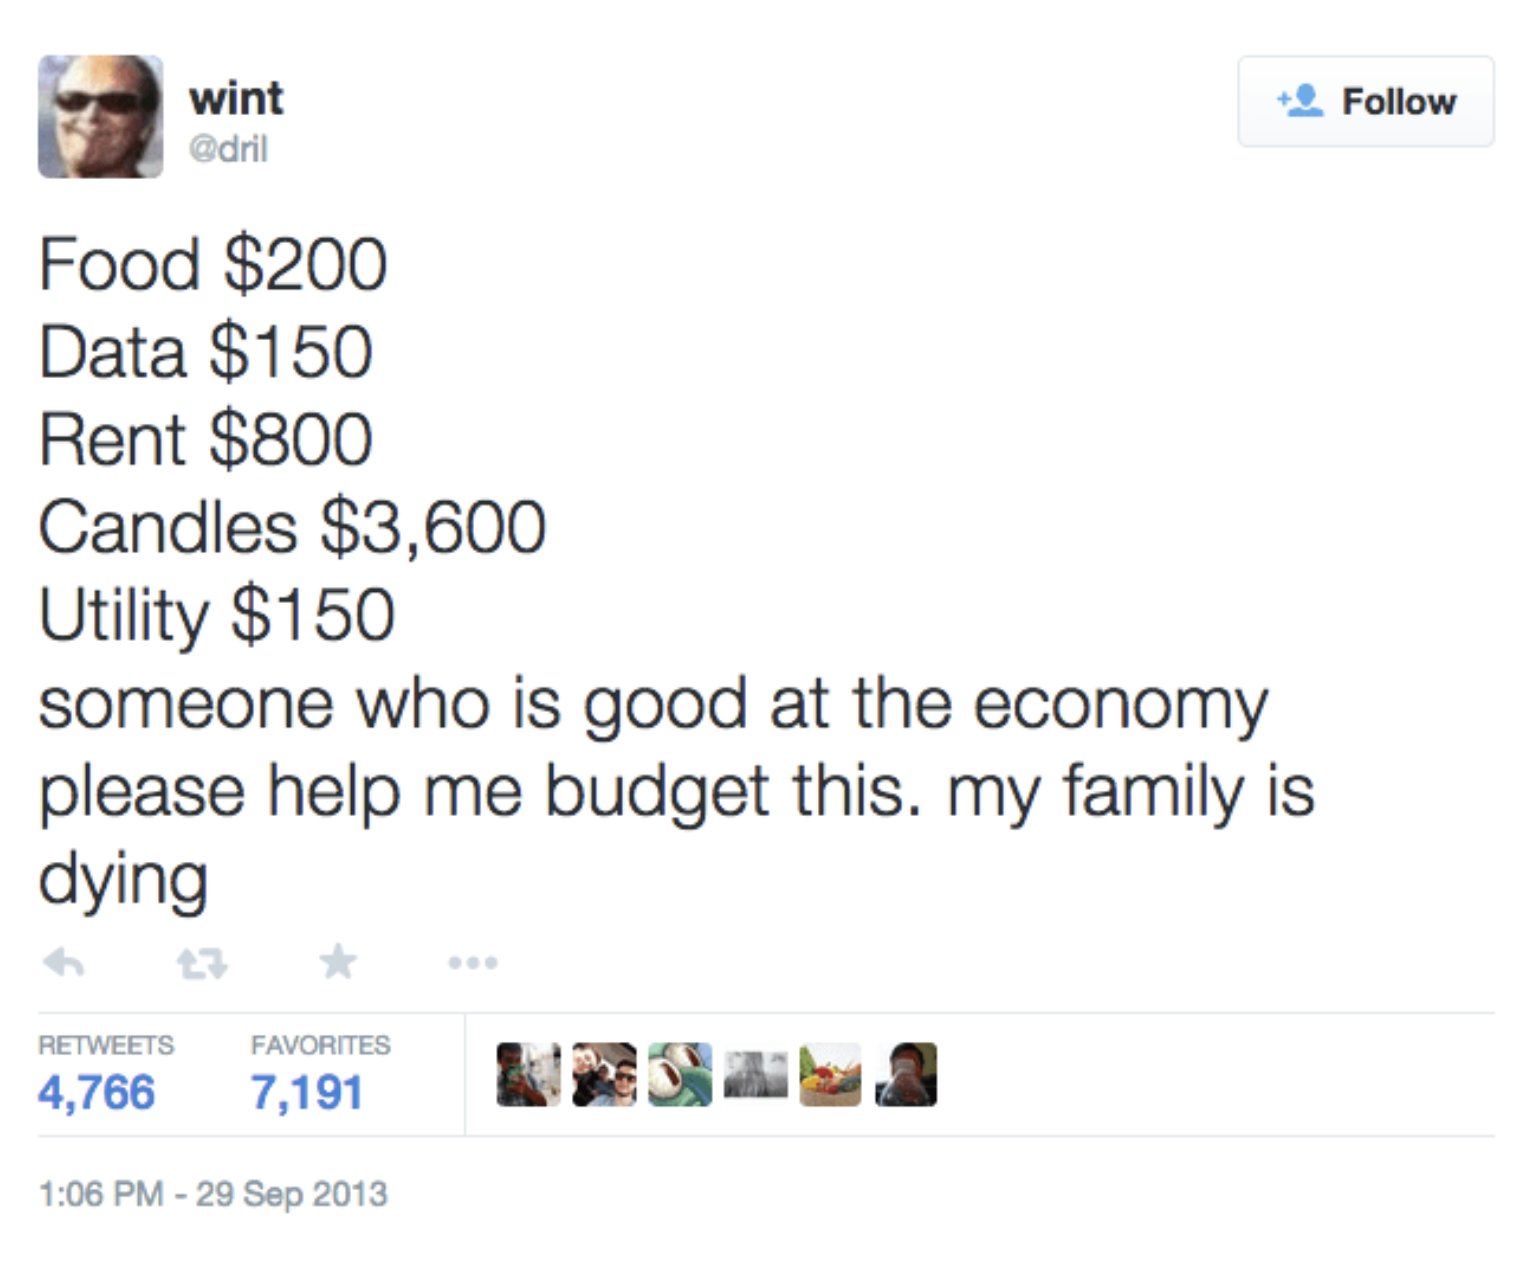 Best Tweets of All Time - someone who is good at the economy please help me budget this - wint Food $200 Data $150 Rent $800 Candles $3,600 Utility $150 someone who is good at the economy please help me budget this. my family is dying 4,766 Favorites 7,19